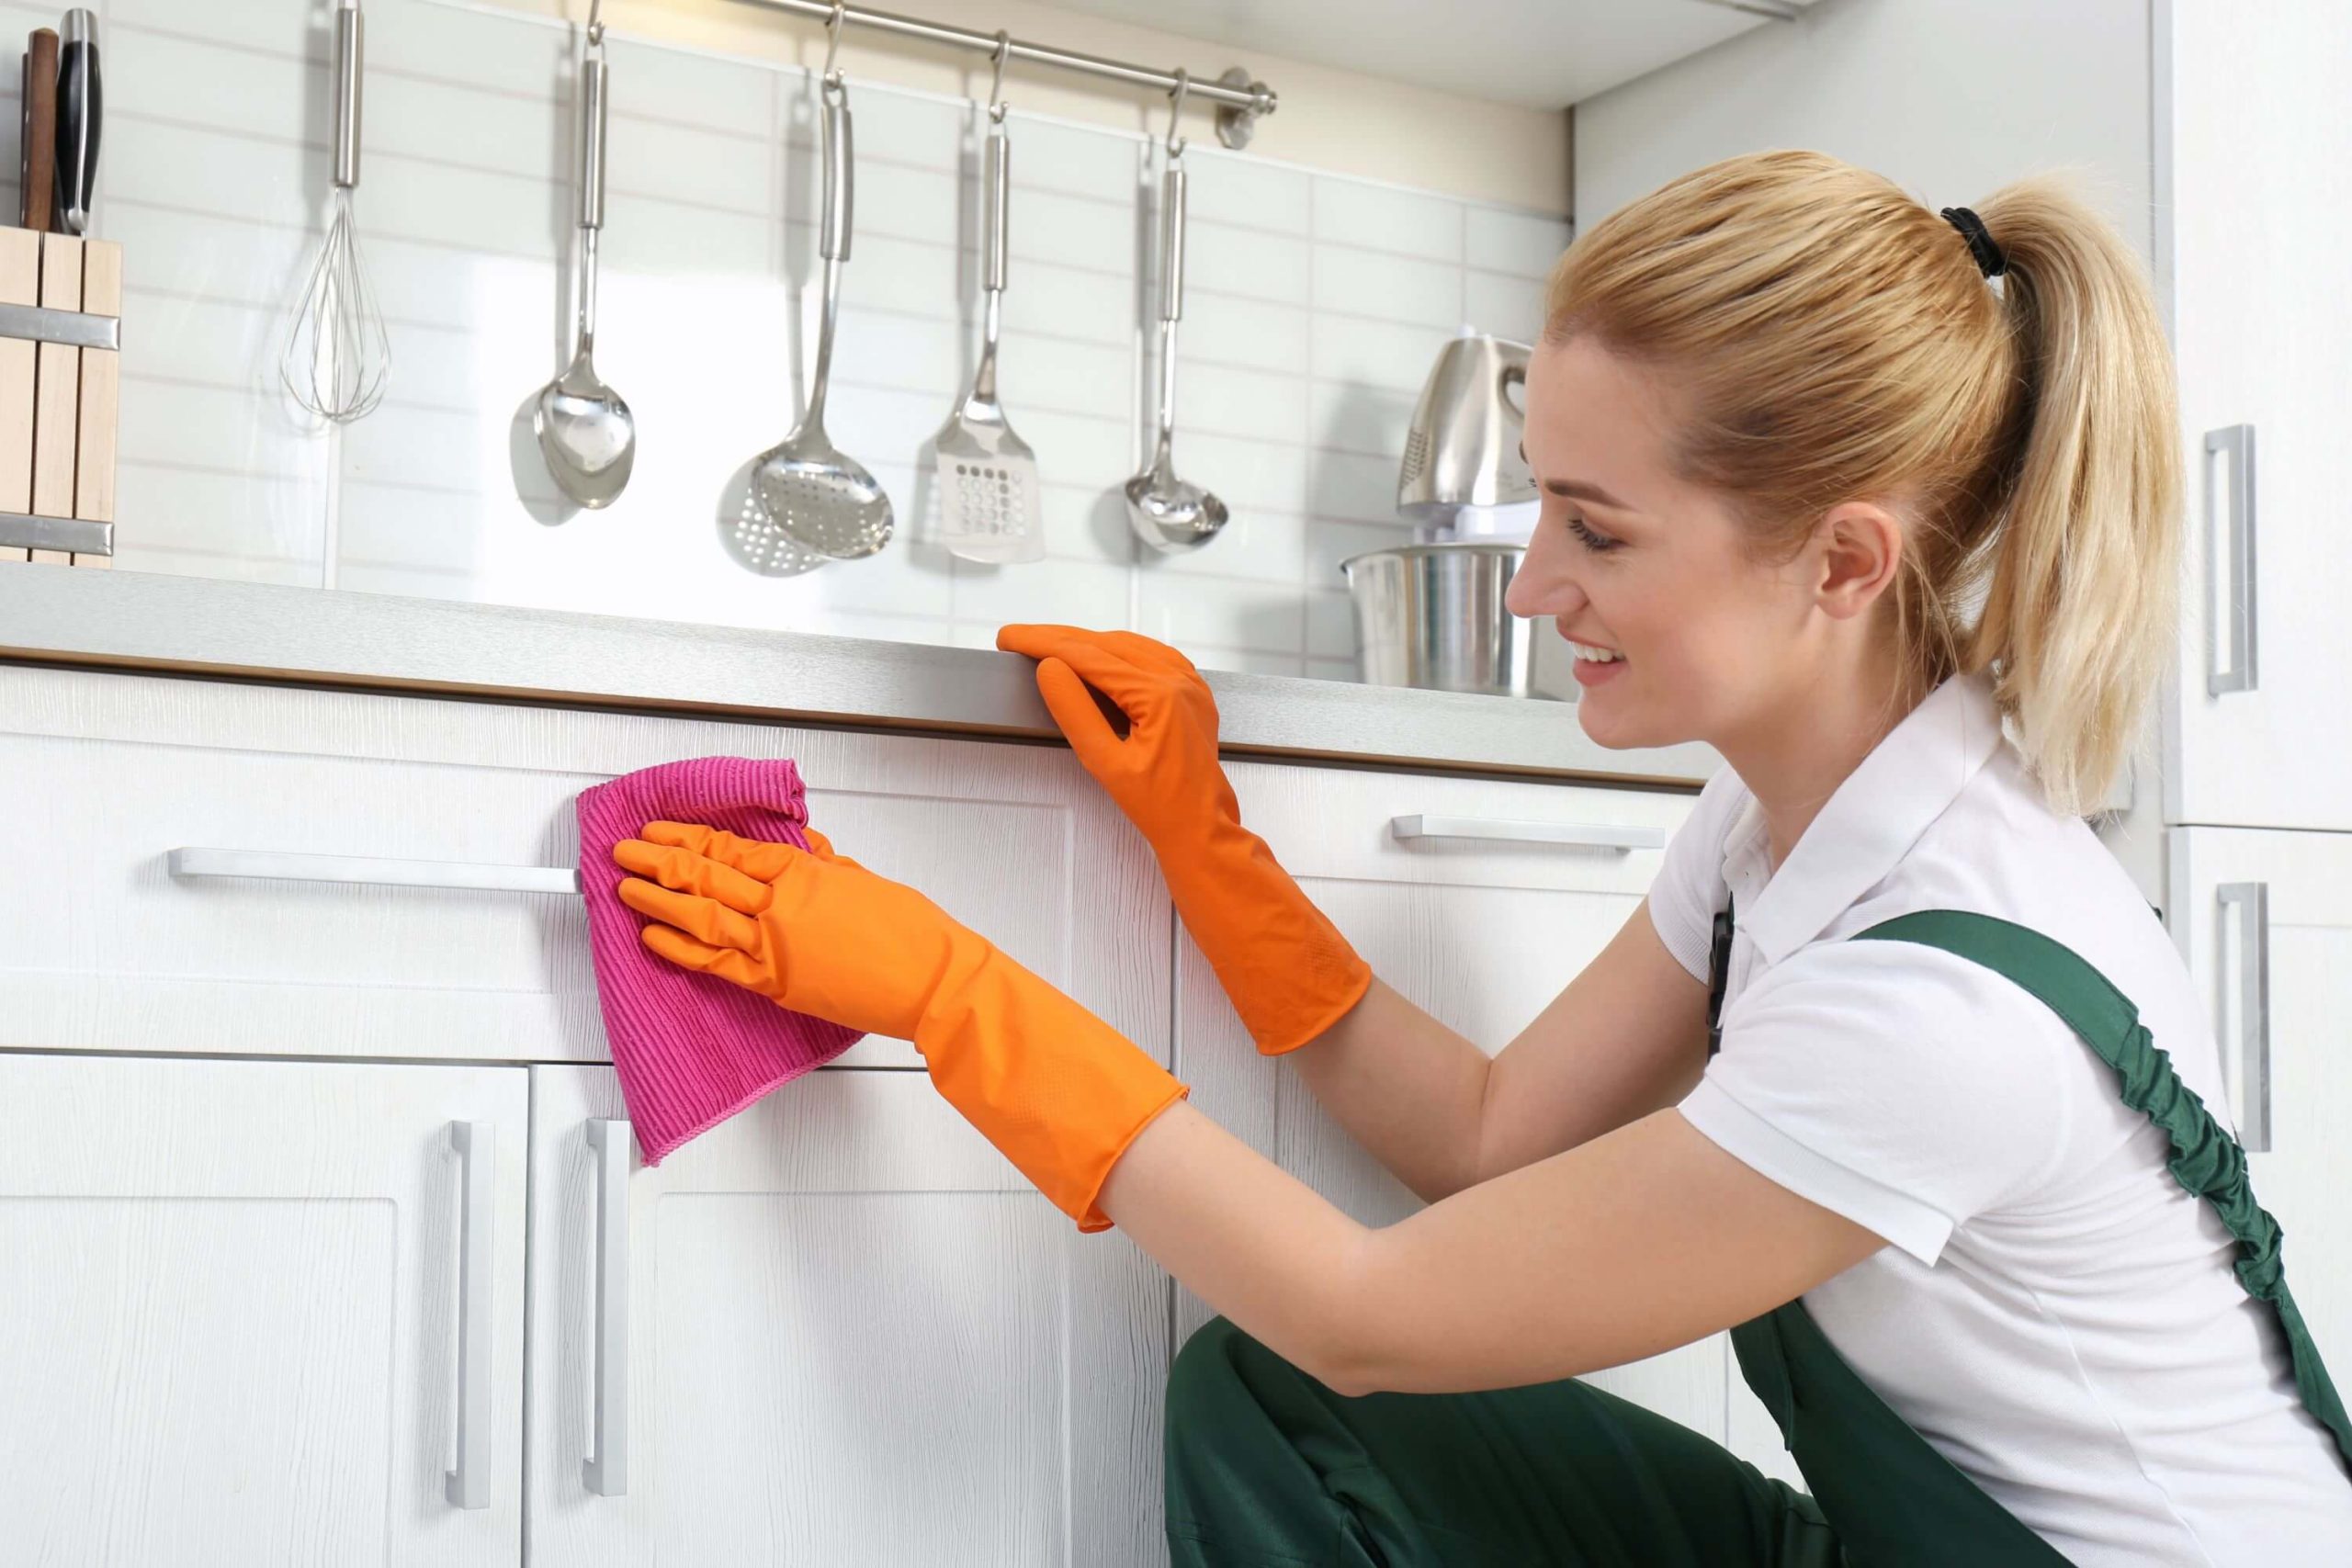 cleaning vinyl wrap kitchen cabinets regularly keeps them from deteriorating